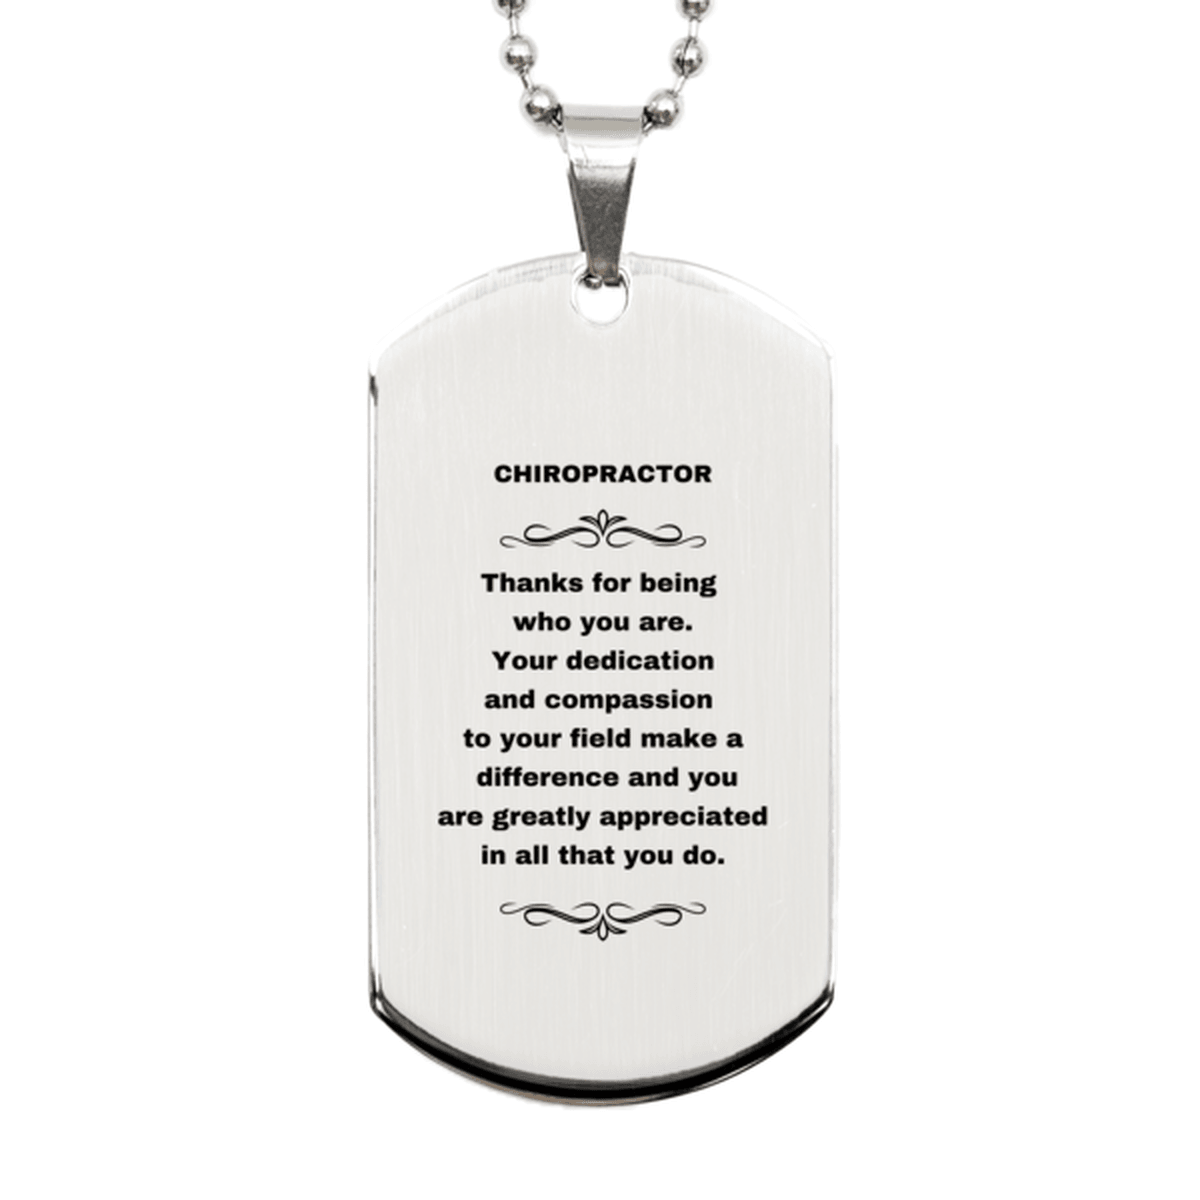 Chiropractor Silver Dog Tag Engraved Necklace - Thanks for being who you are - Birthday Christmas Jewelry Gifts Coworkers Colleague Boss - Mallard Moon Gift Shop